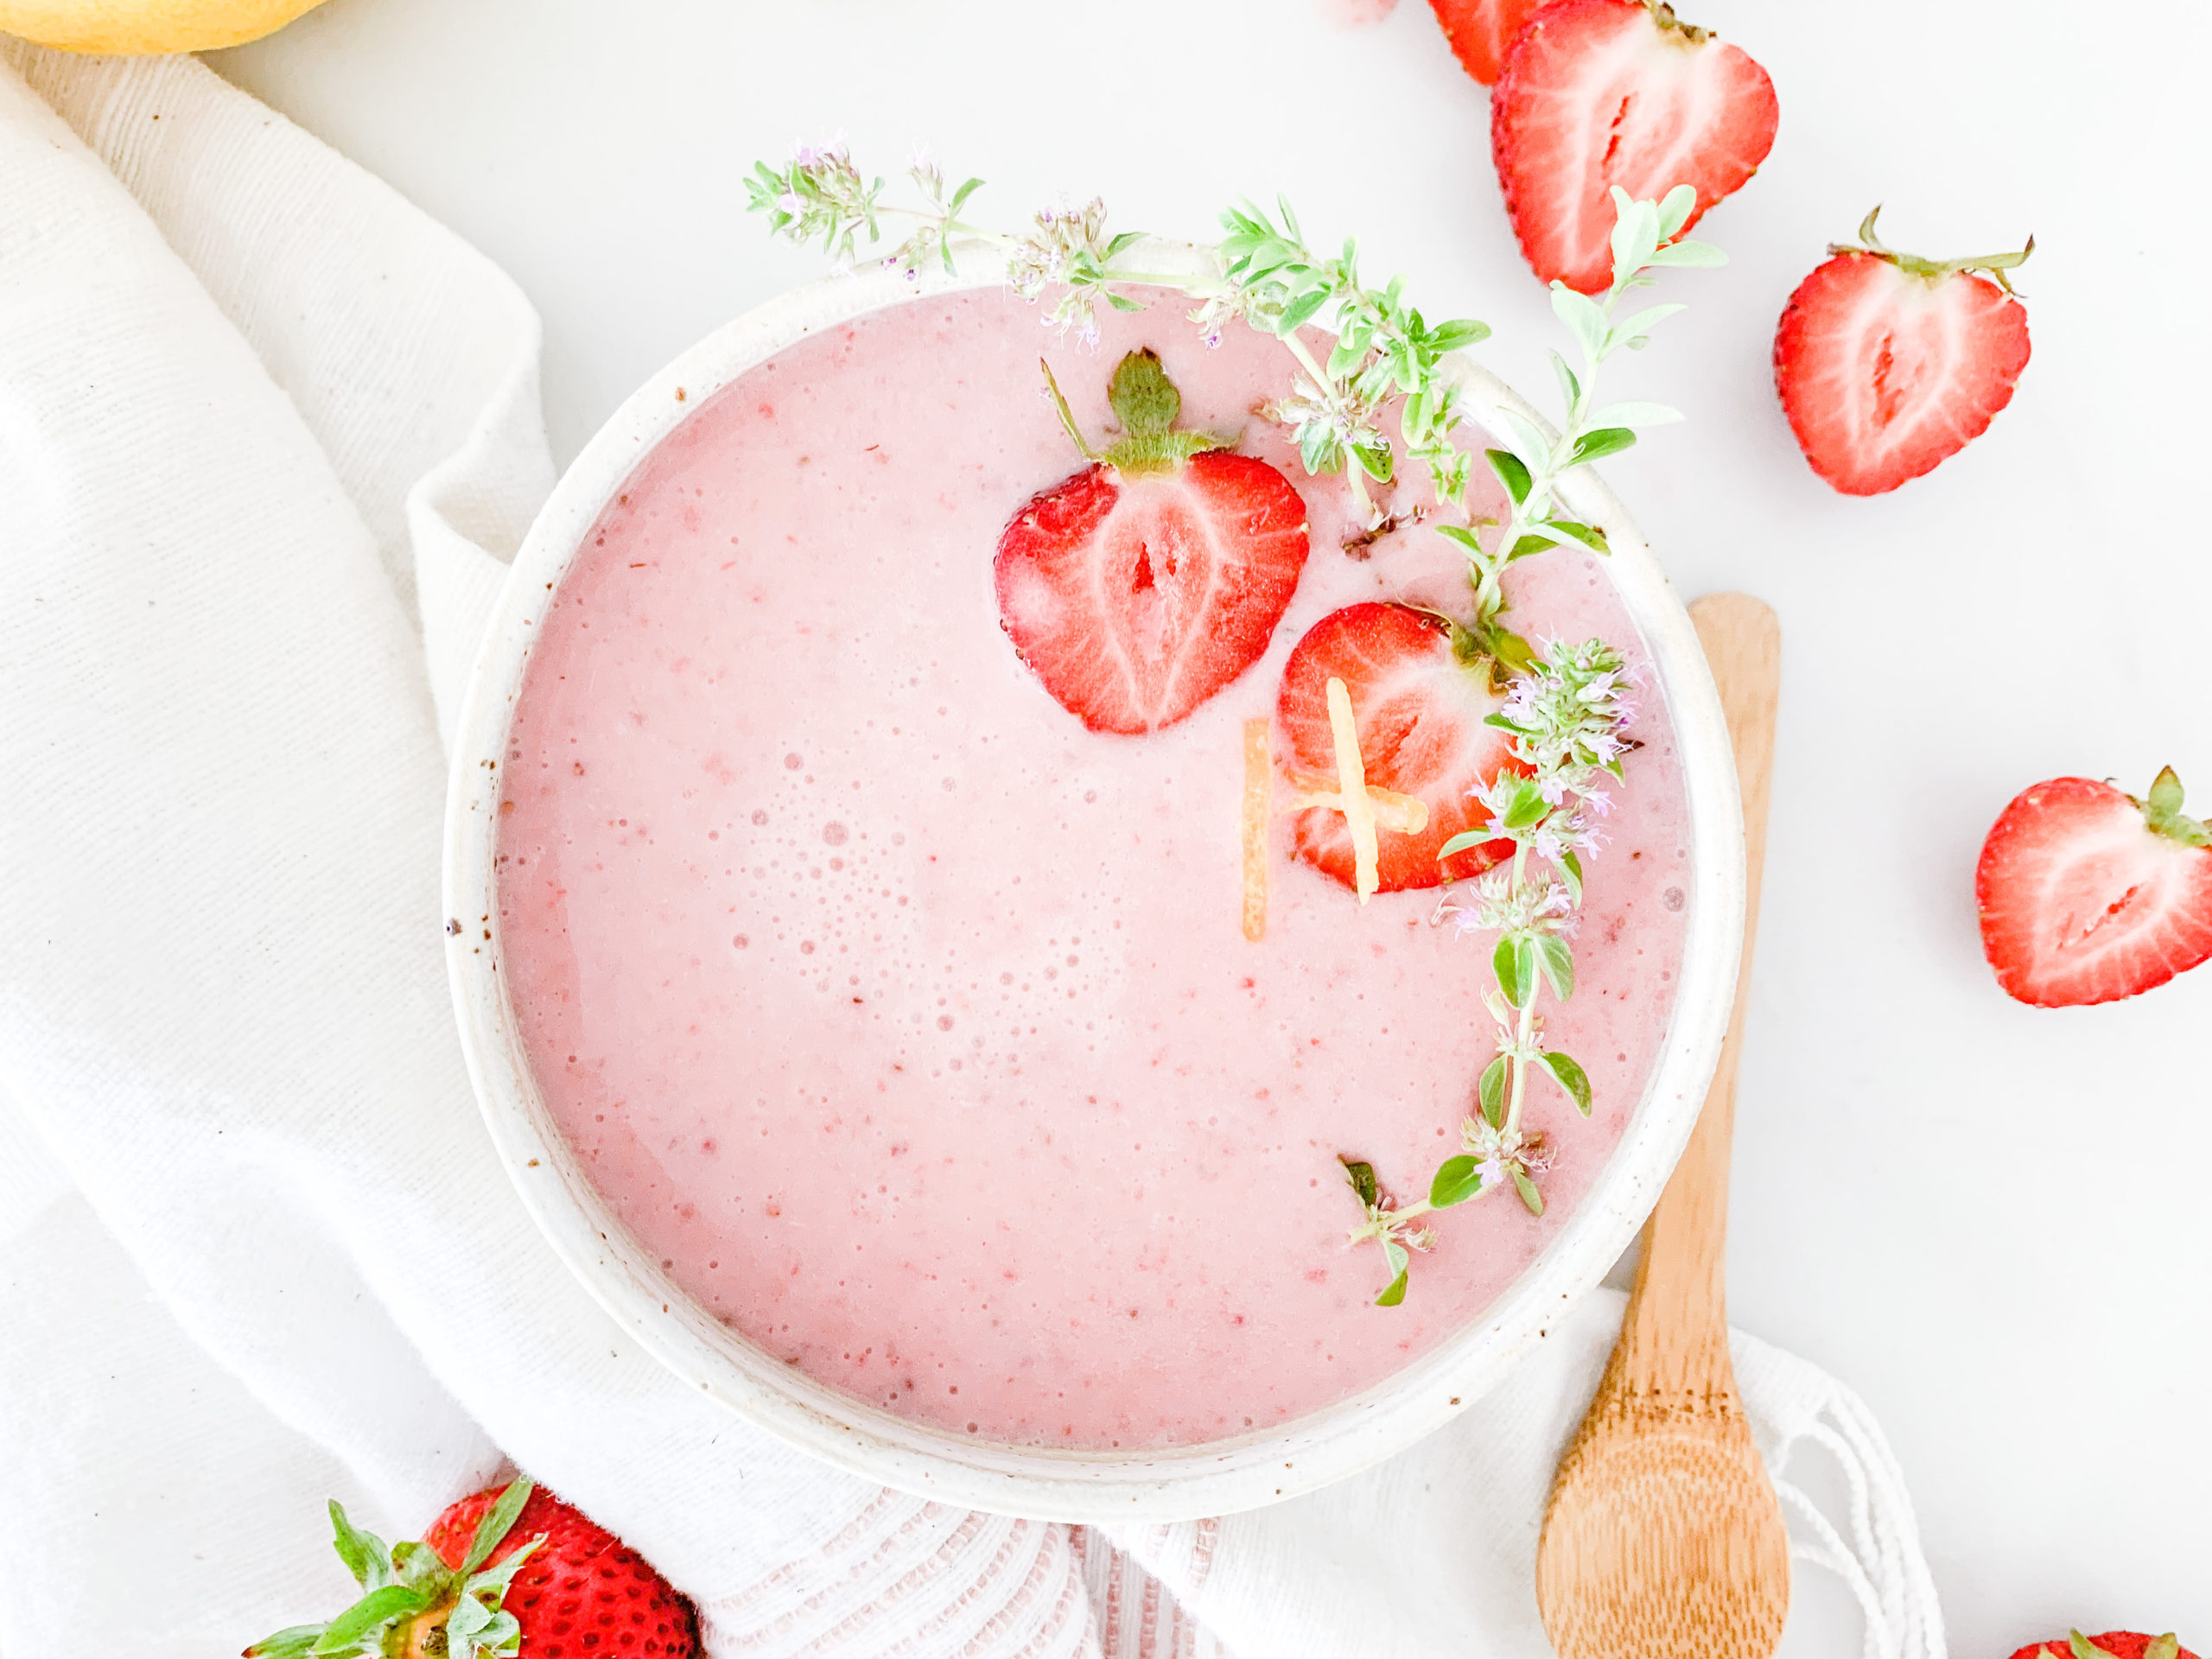 A Chilled Strawberry-Lemon Thyme Soup